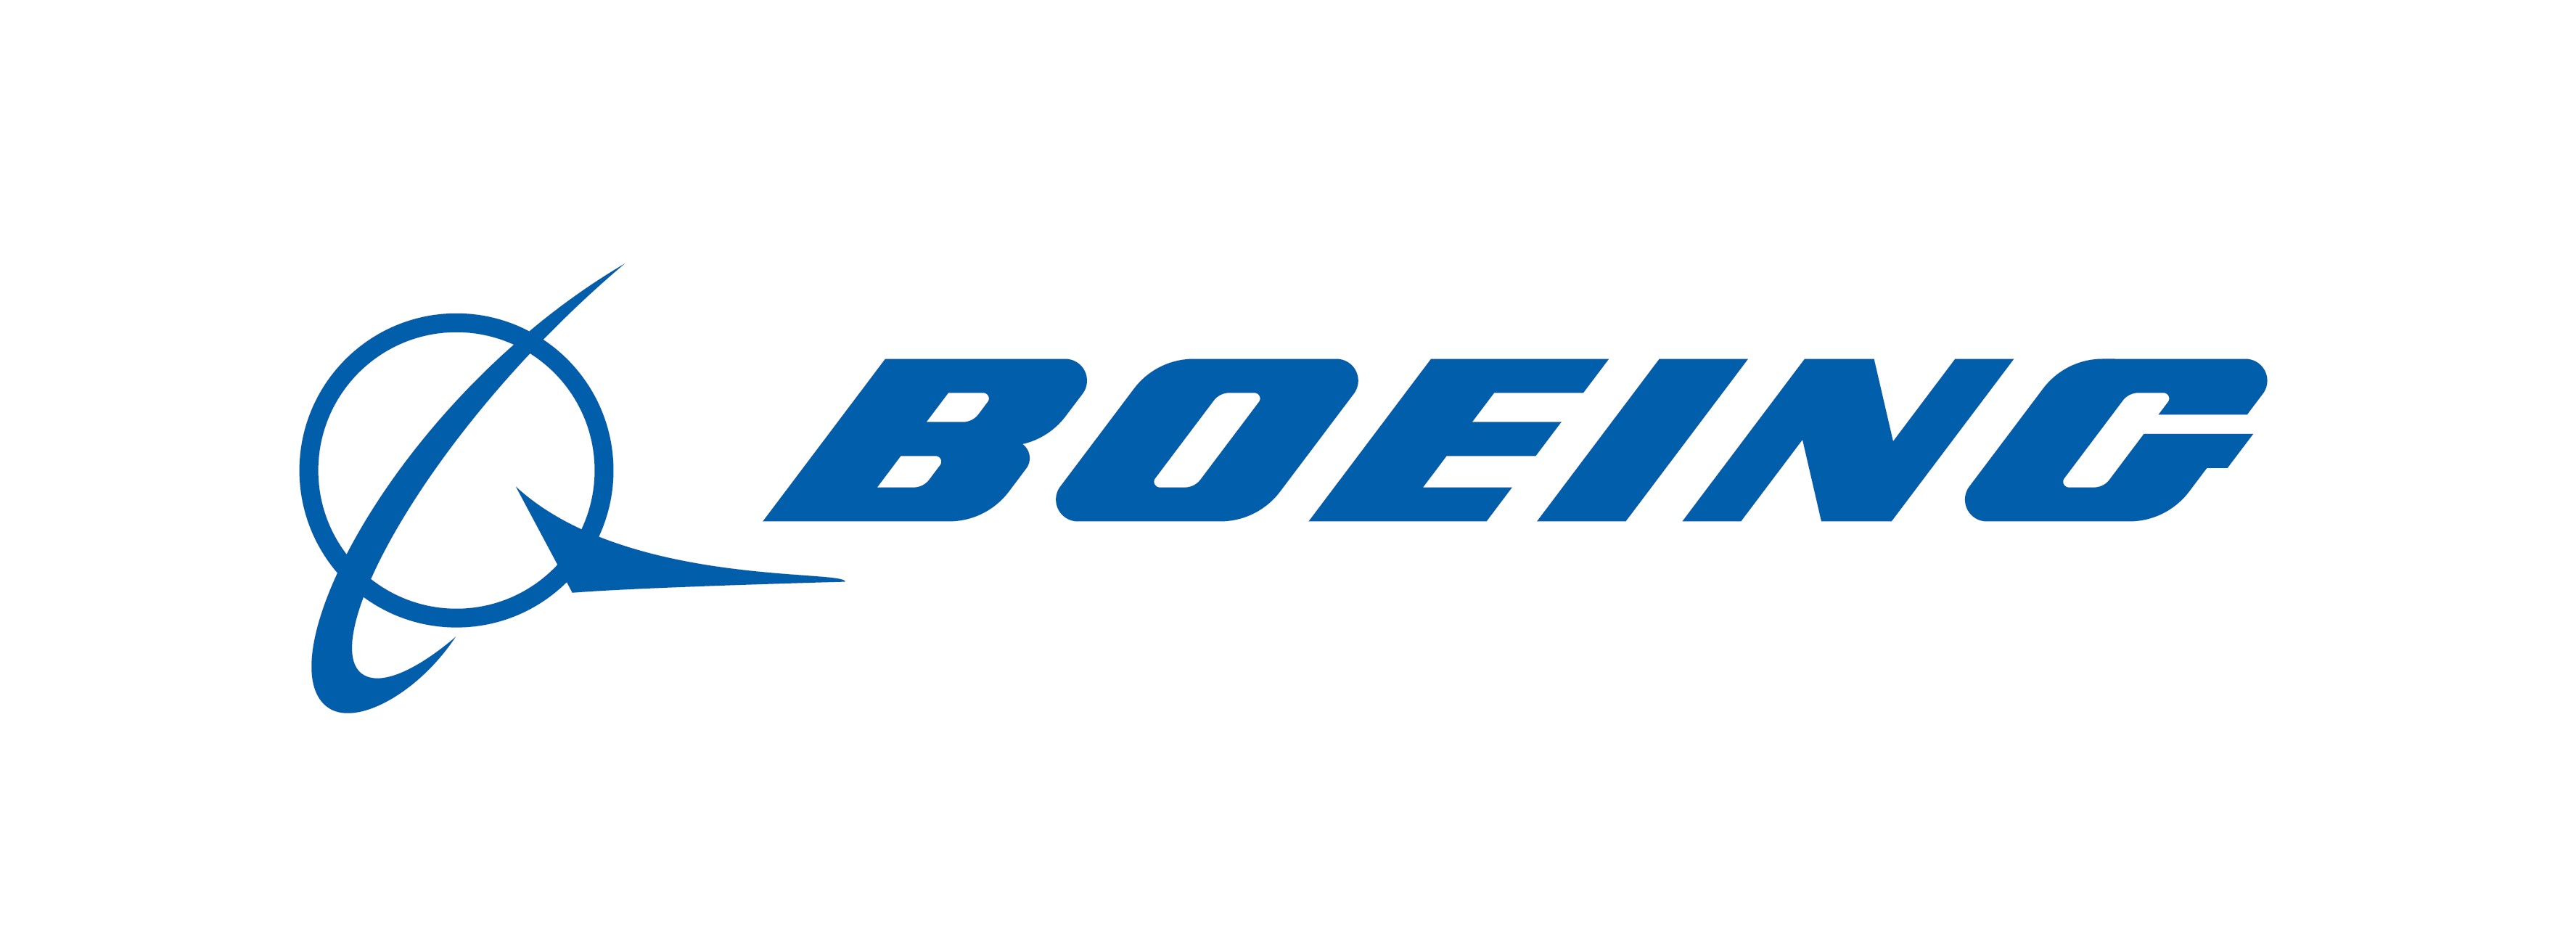 The Boeing Company is the Platinum and Wi-Fi Sponsor of Flocon 2023